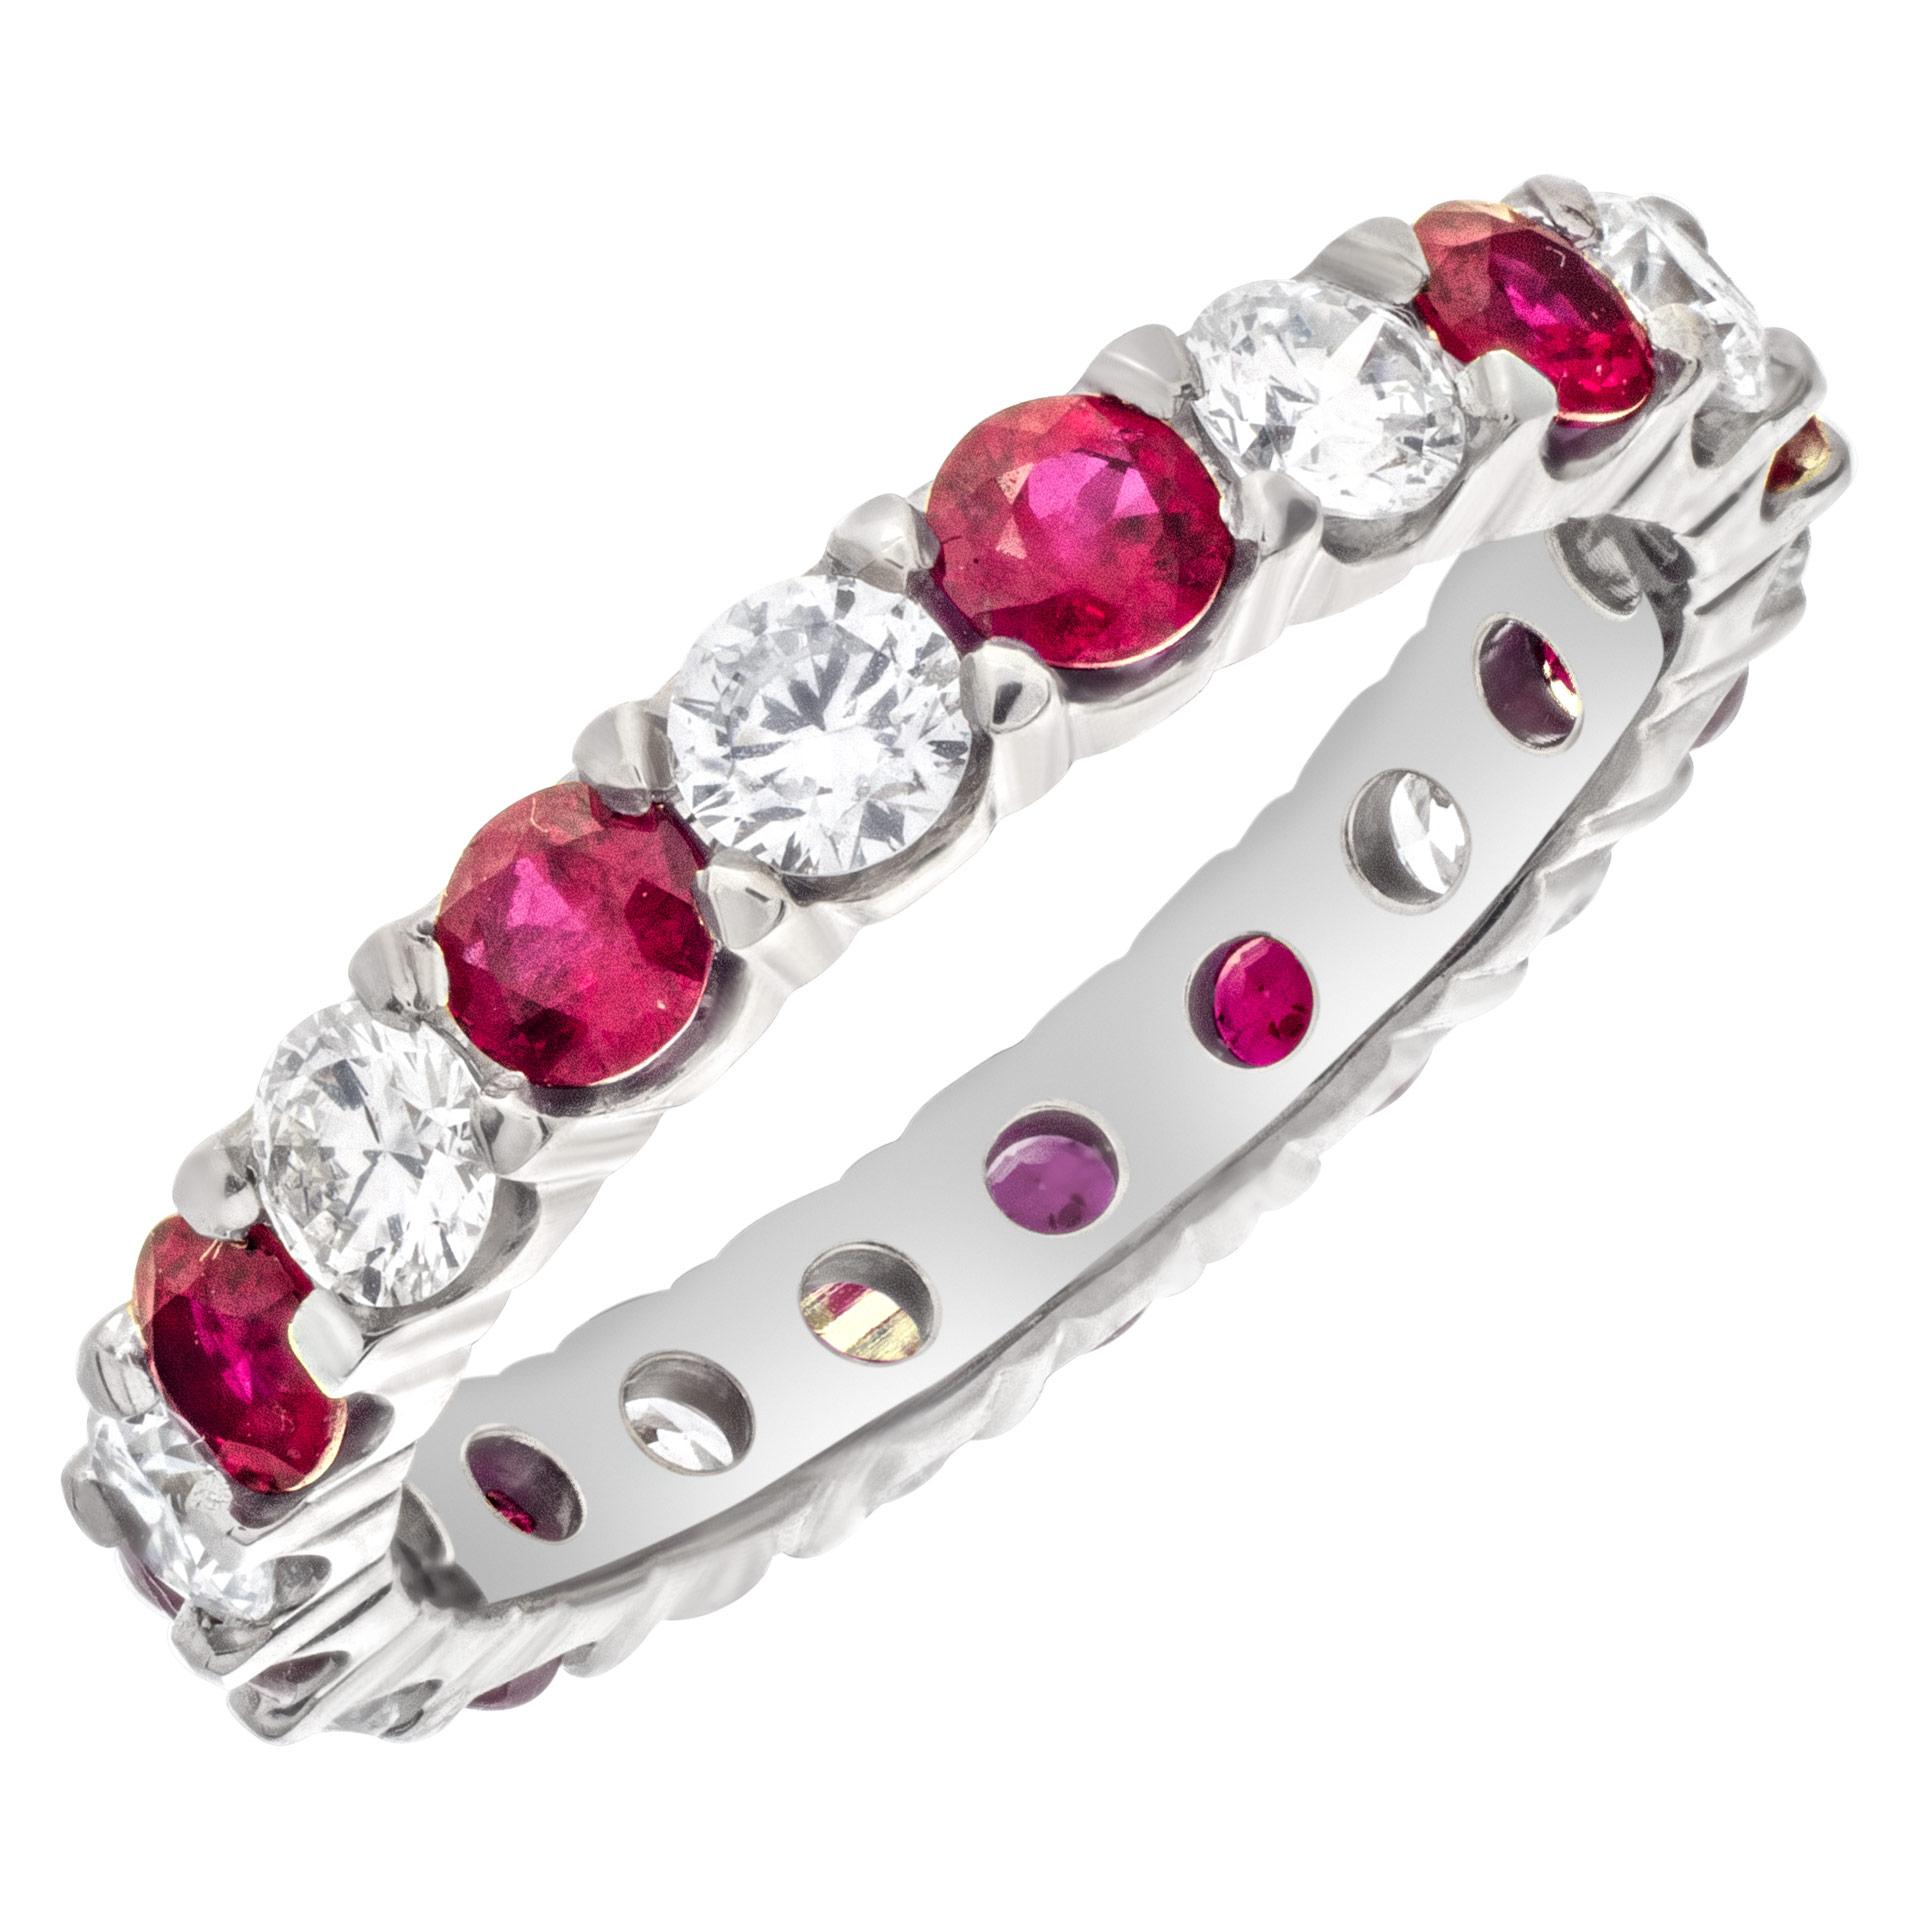 Diamonds & rubies eternity band with 1.50 carats in round brilliant full cut G-H color, SI clarity diamonds and 1 carat in round cut rubies set in 18k white gold. Size 7  This Eternity Band ring is currently size 7 and some items can be sized up or